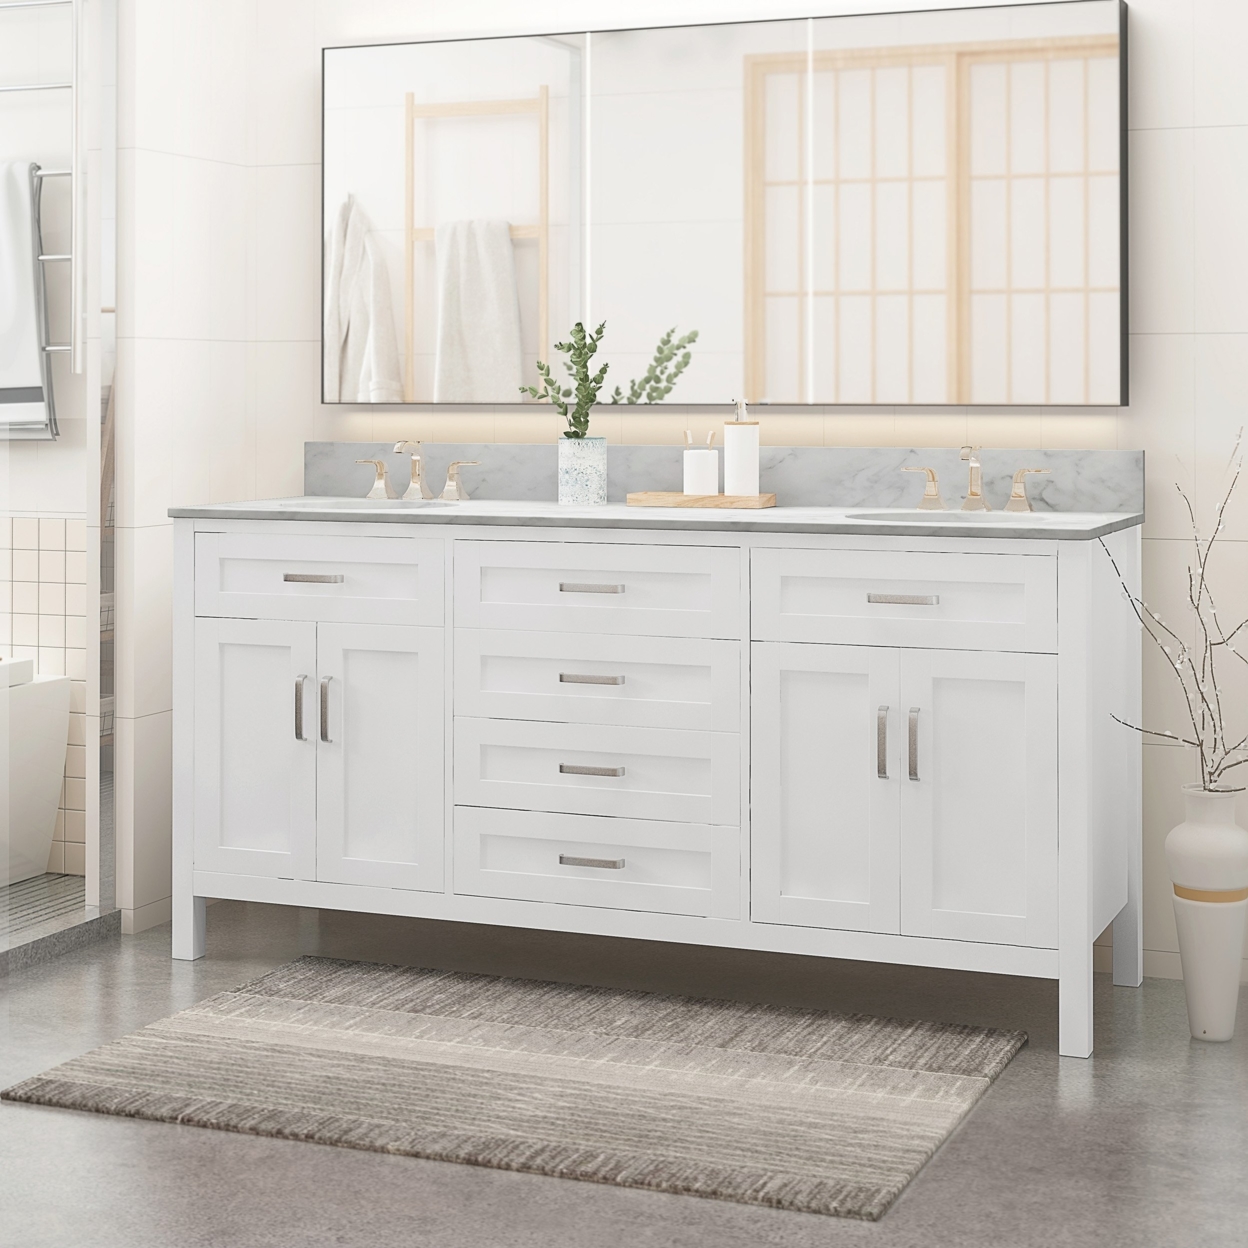 Greeley Contemporary 72 Wood Double Sink Bathroom Vanity With Marble Counter Top With Carrara White Marble - Gray